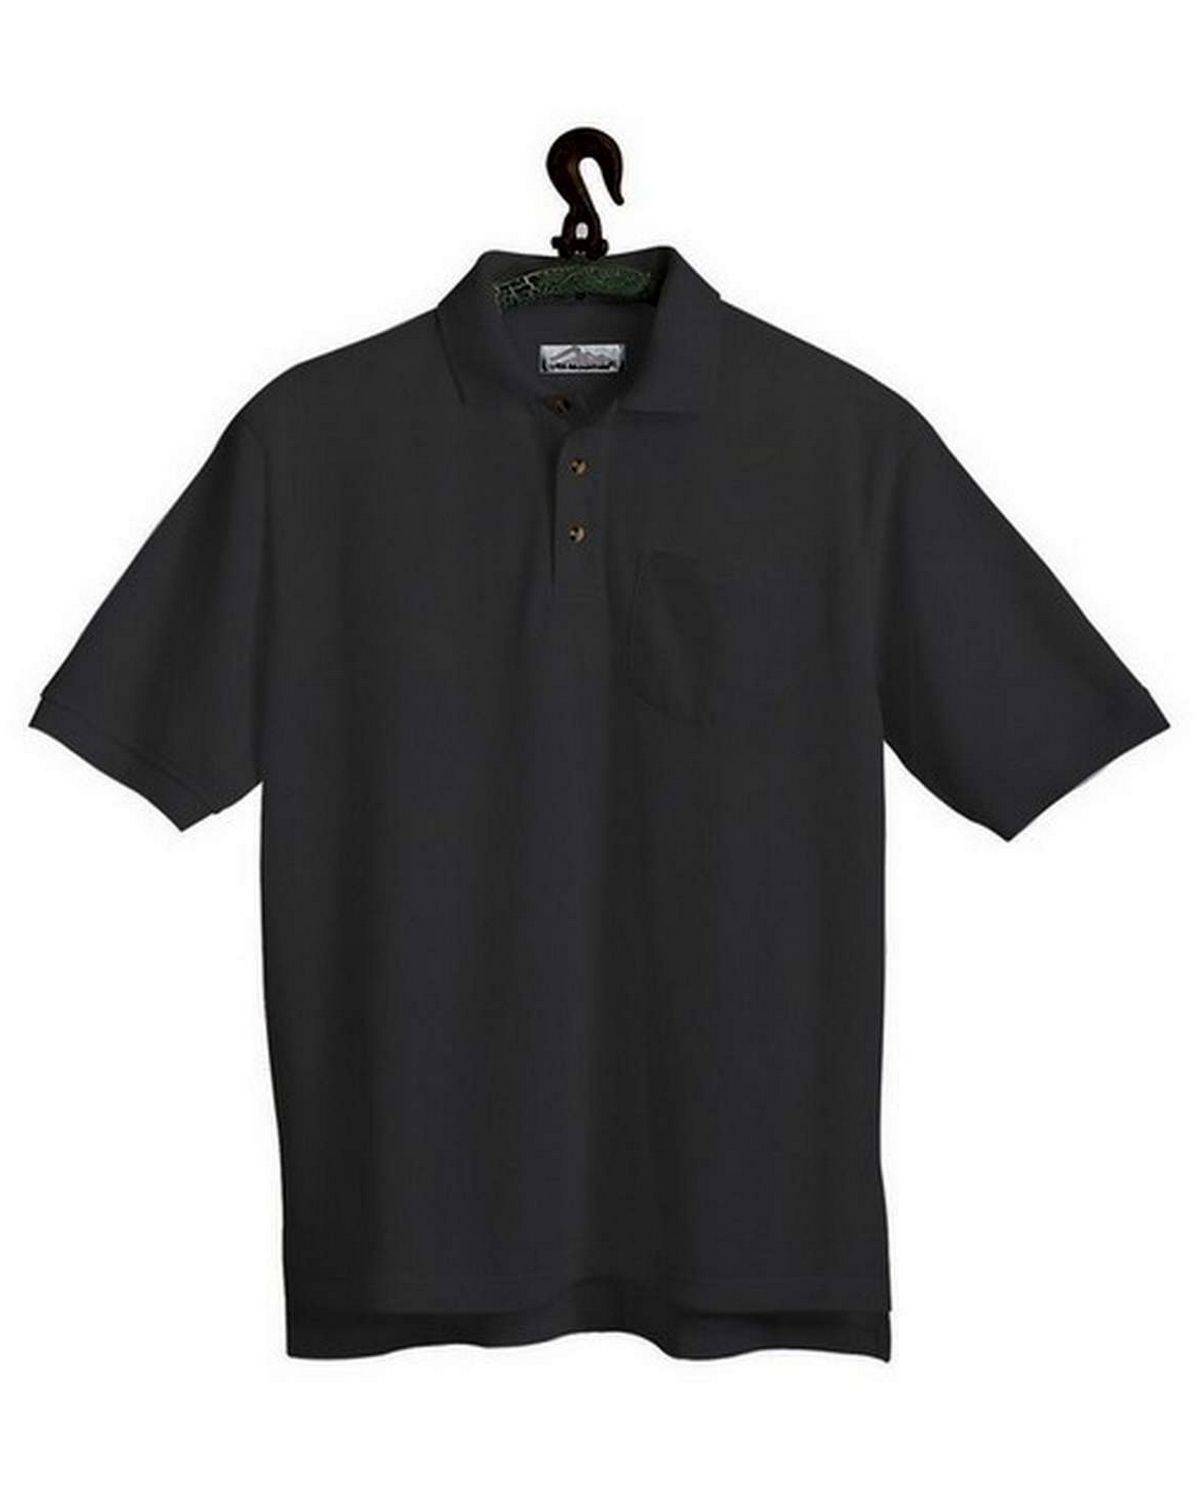 Tri-Mountain 206 Men's Stain Resistant Pique Pocketed Golf Shirt